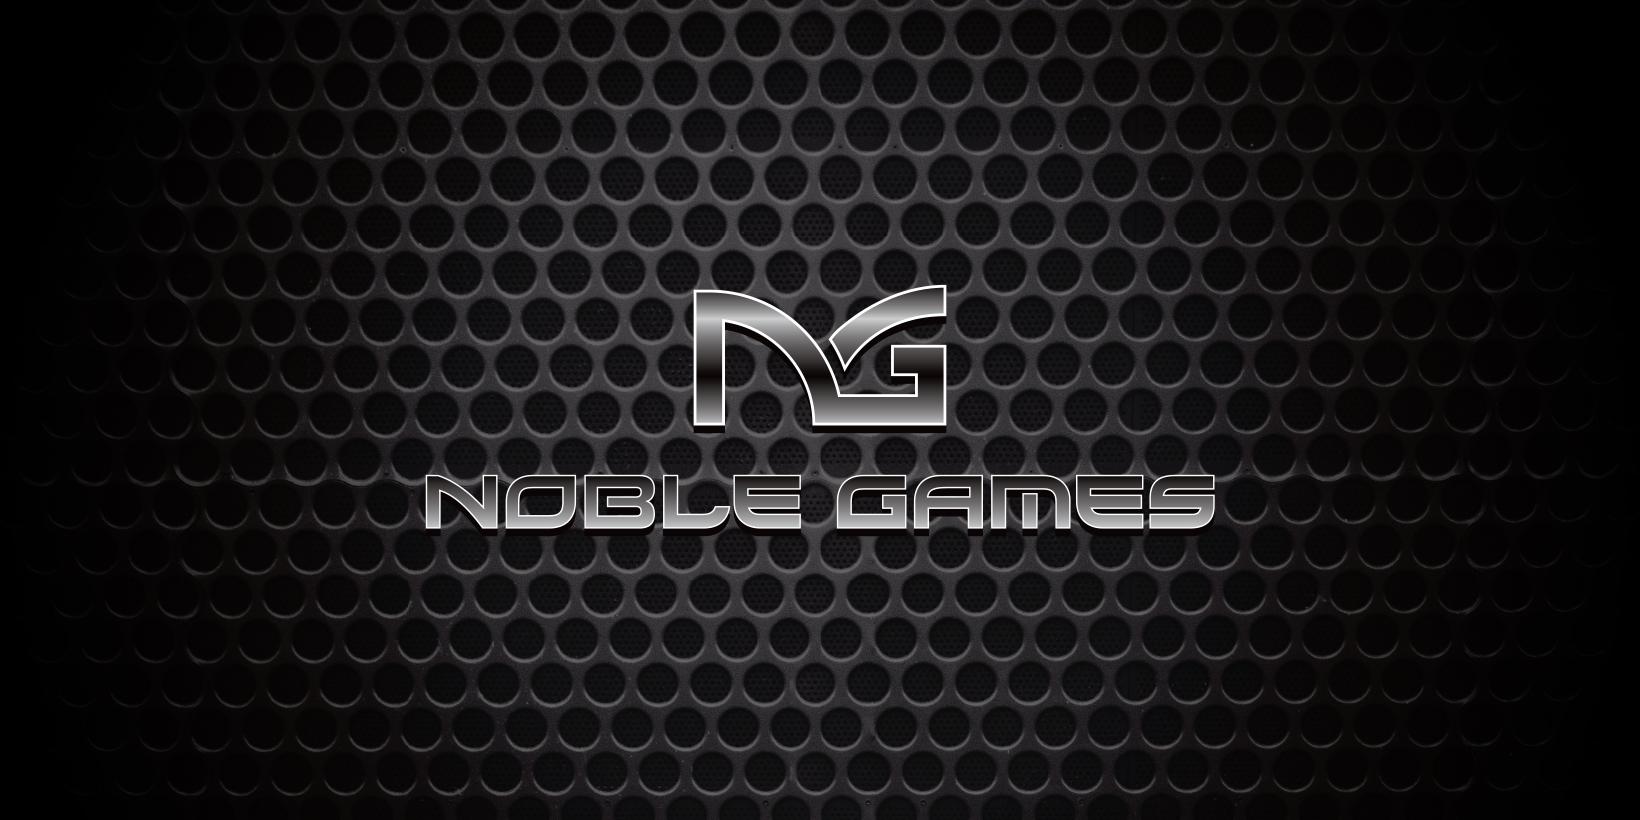 Nobel Games Brand Identity and Website Development by Think Creative Agency7